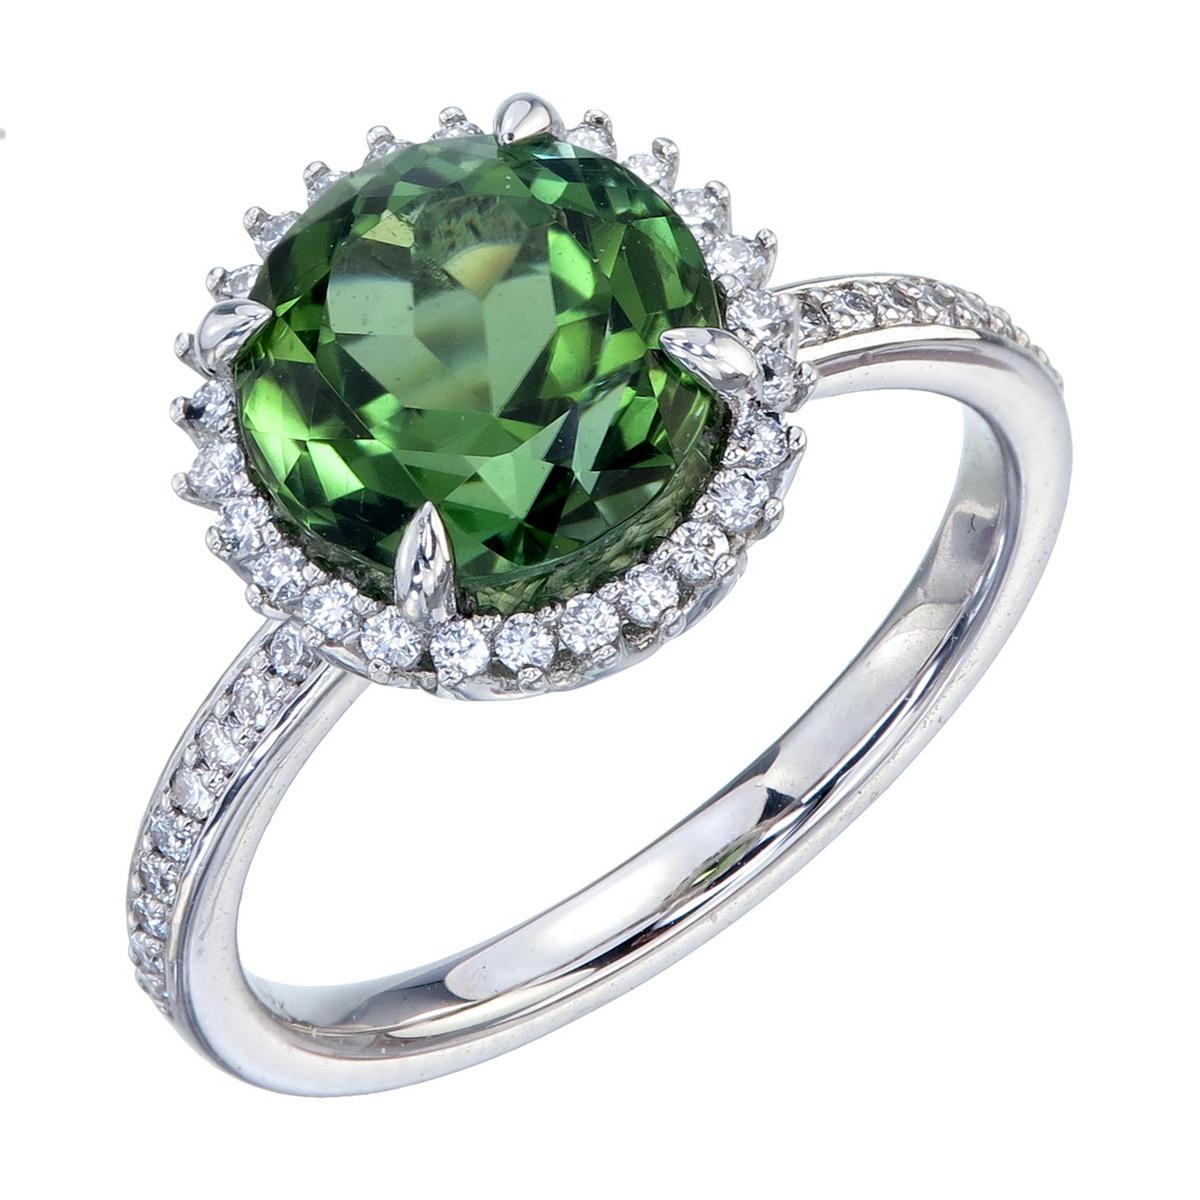 Orloff of Denmark's own; Auspicious Clover
GIA certified 'Lucky' Olive Green Tourmaline set in 950 Platinum accompanied by an assortment brilliant VS1, F-Colored Diamonds
LGL mining certificates are included, showing the arduous journey starting